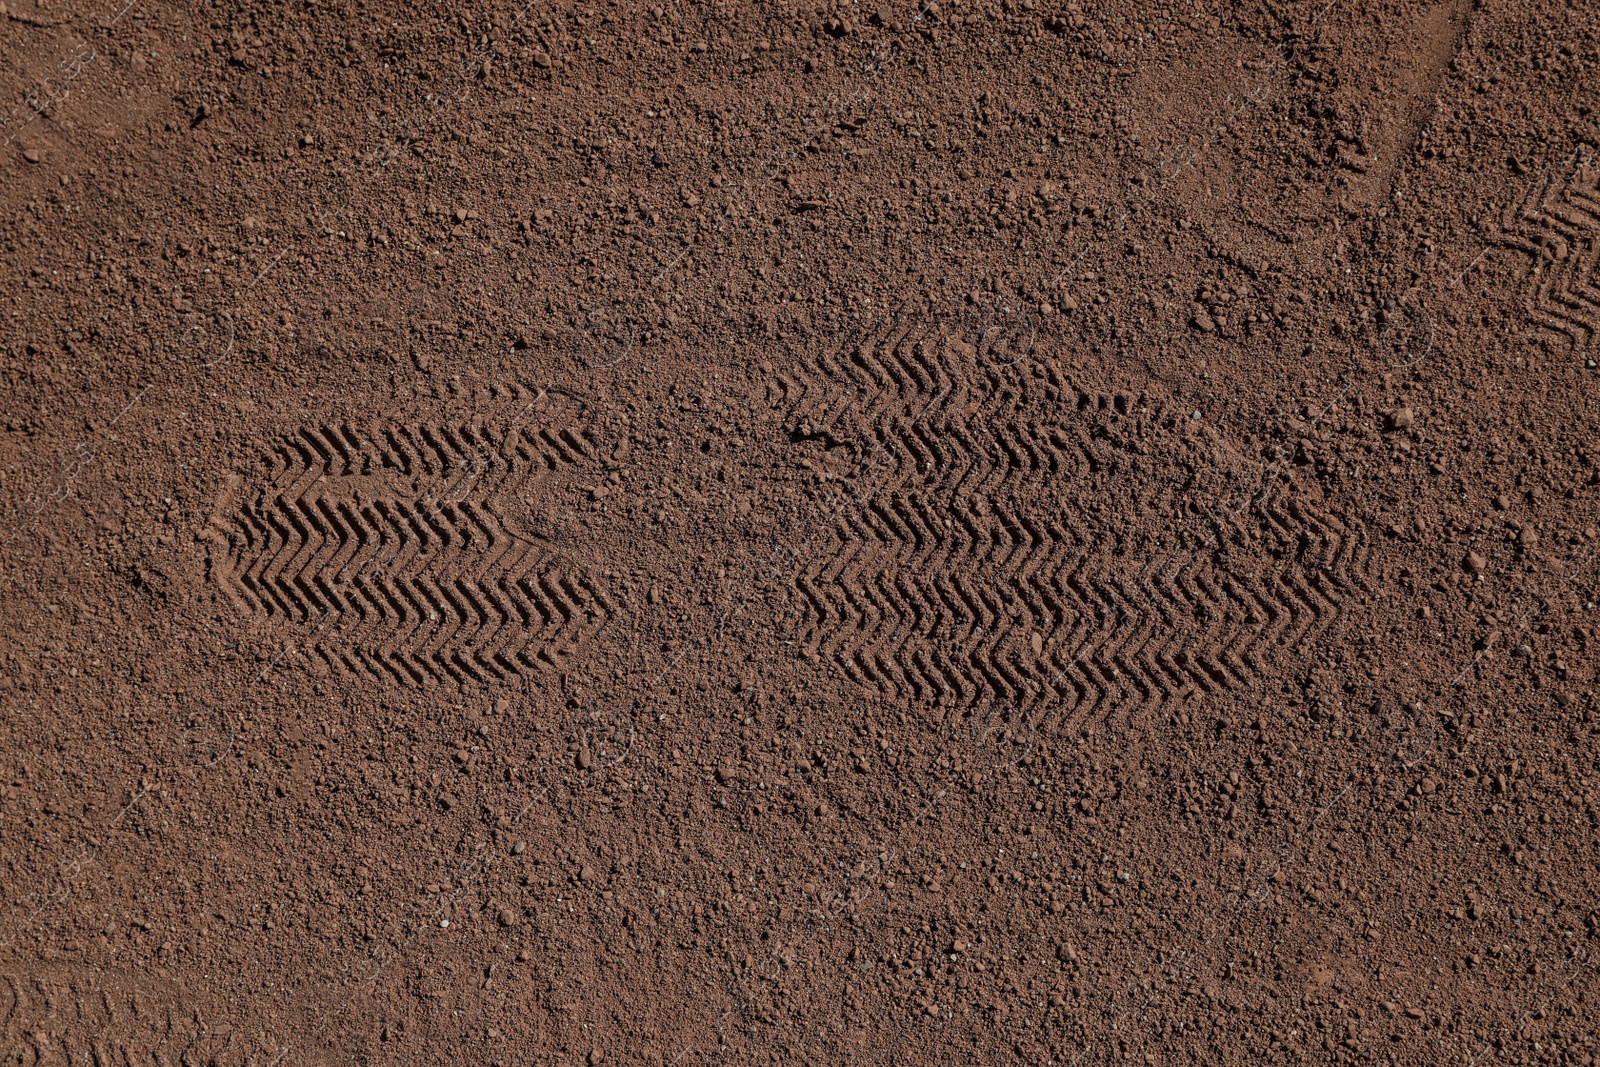 Photo of Textured ground surface with footprint, top view